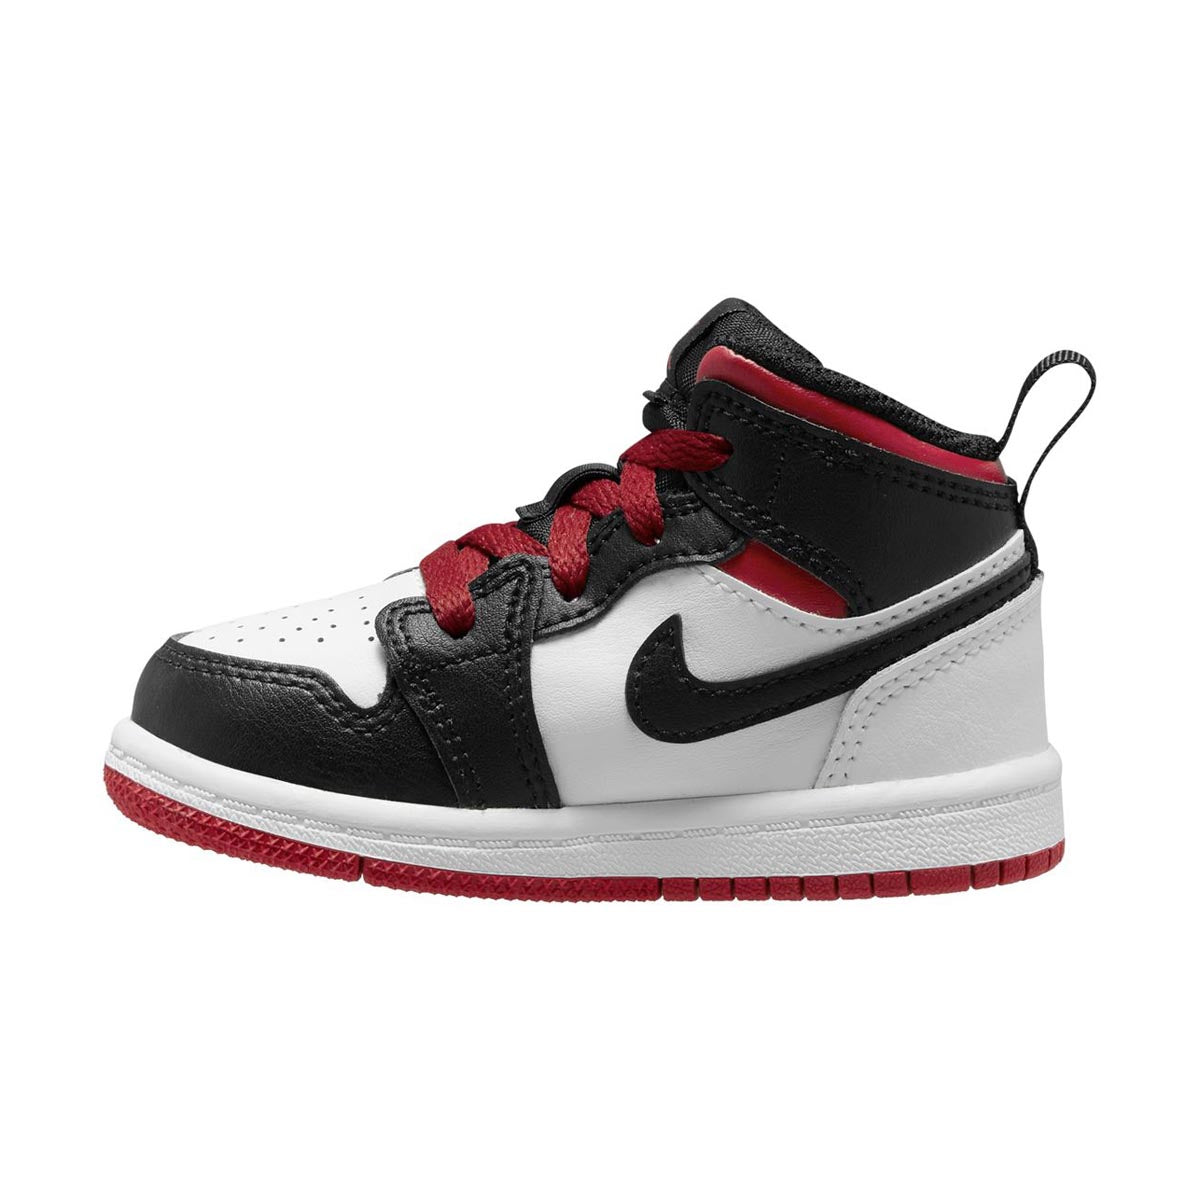 should i resell the part jordan 1 low gym red